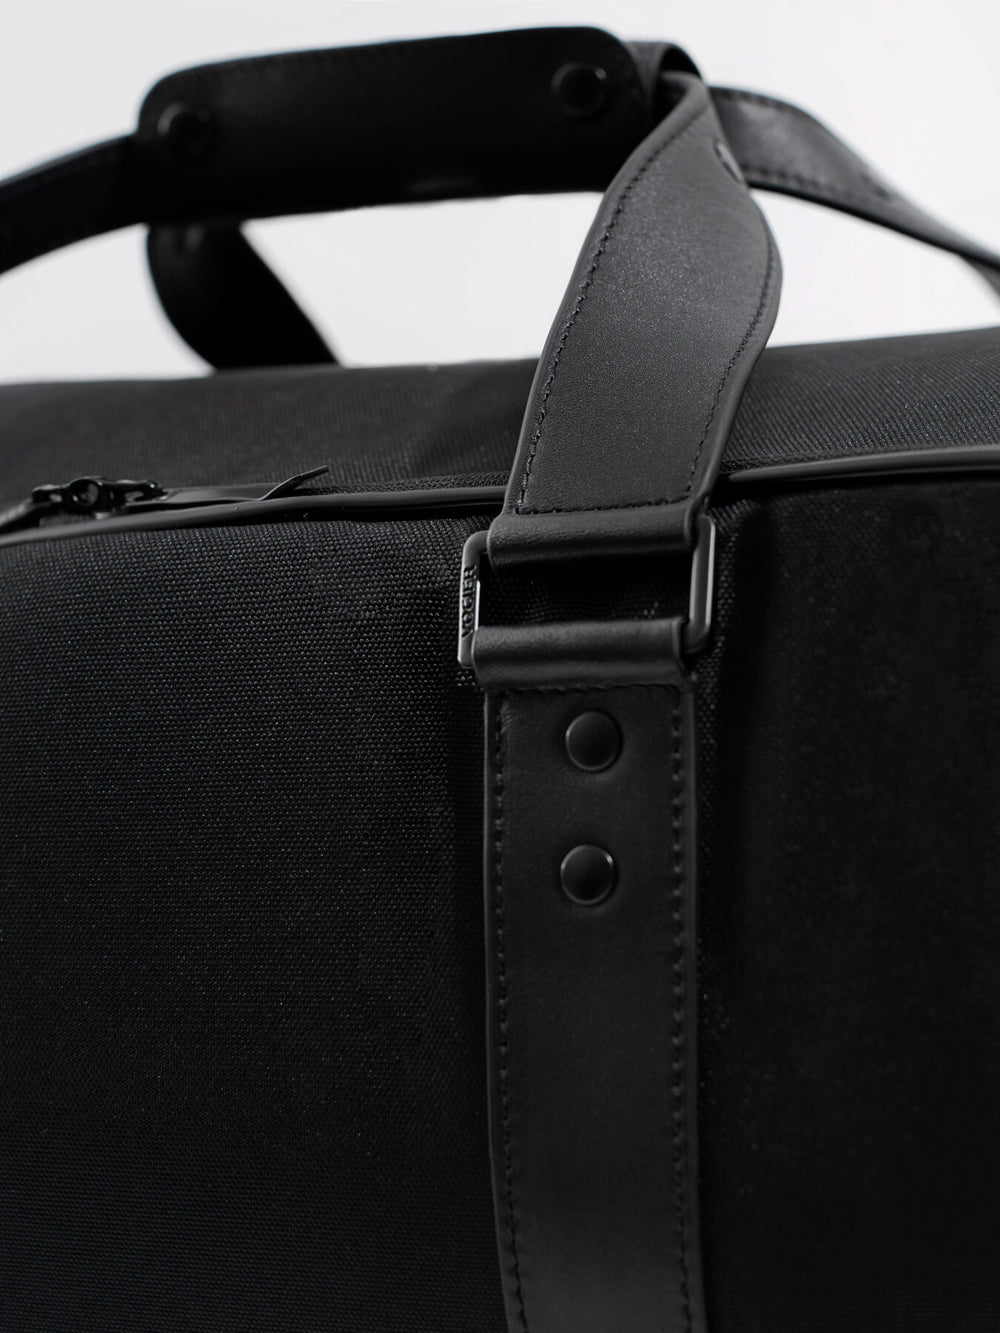 c35 garment bag detail of black nylon fabric and with leather details 